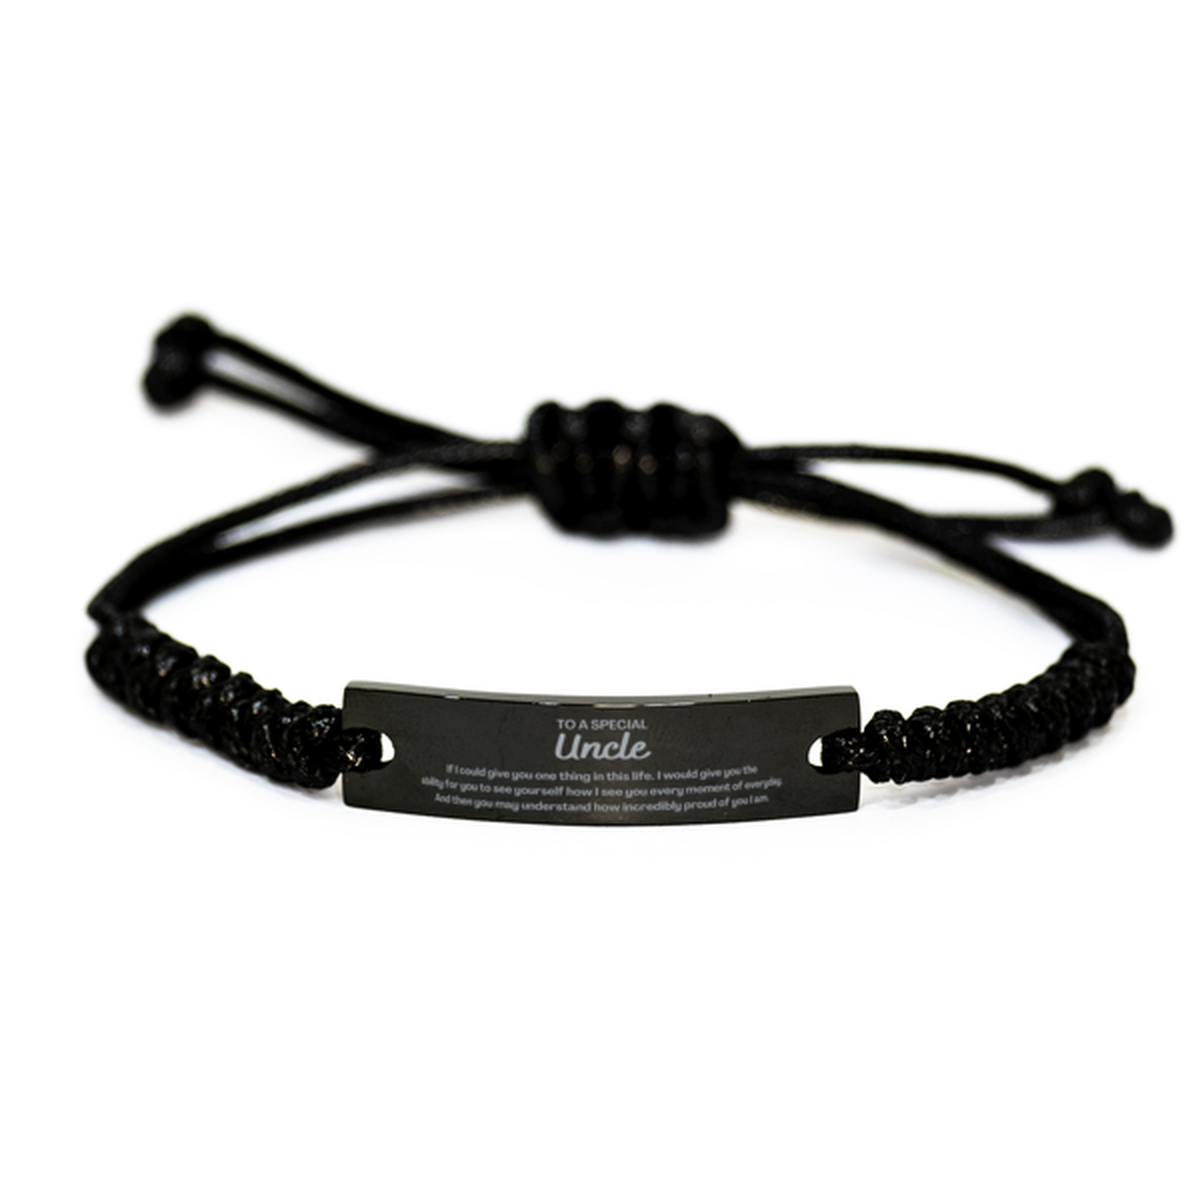 To My Uncle Black Rope Bracelet, Gifts For Uncle Engraved, Inspirational Gifts for Christmas Birthday, Epic Gifts for Uncle To A Special Uncle how incredibly proud of you I am